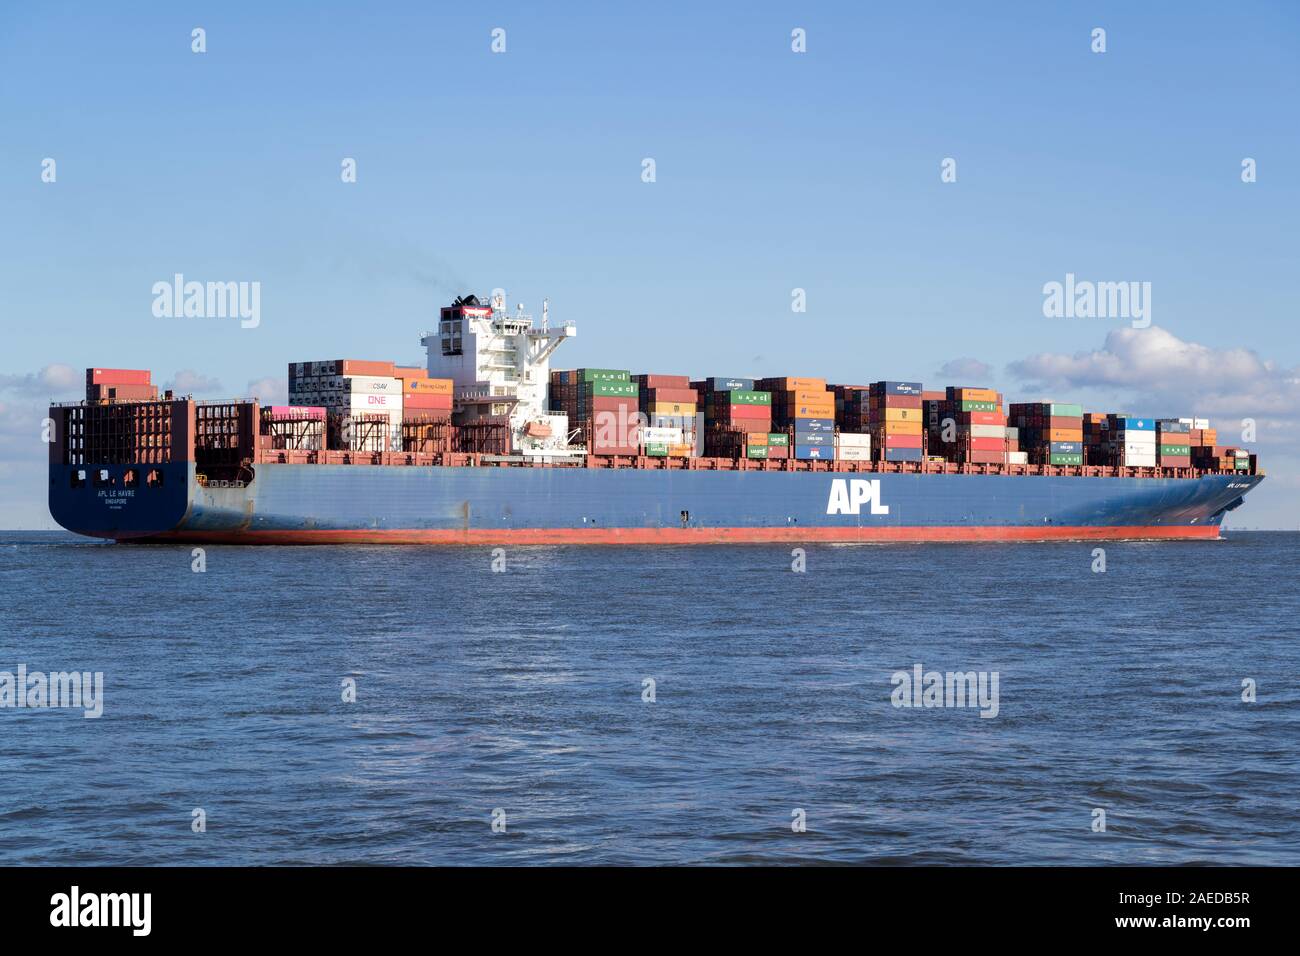 container ship APL LE HAVRE on the river Elbe Stock Photo